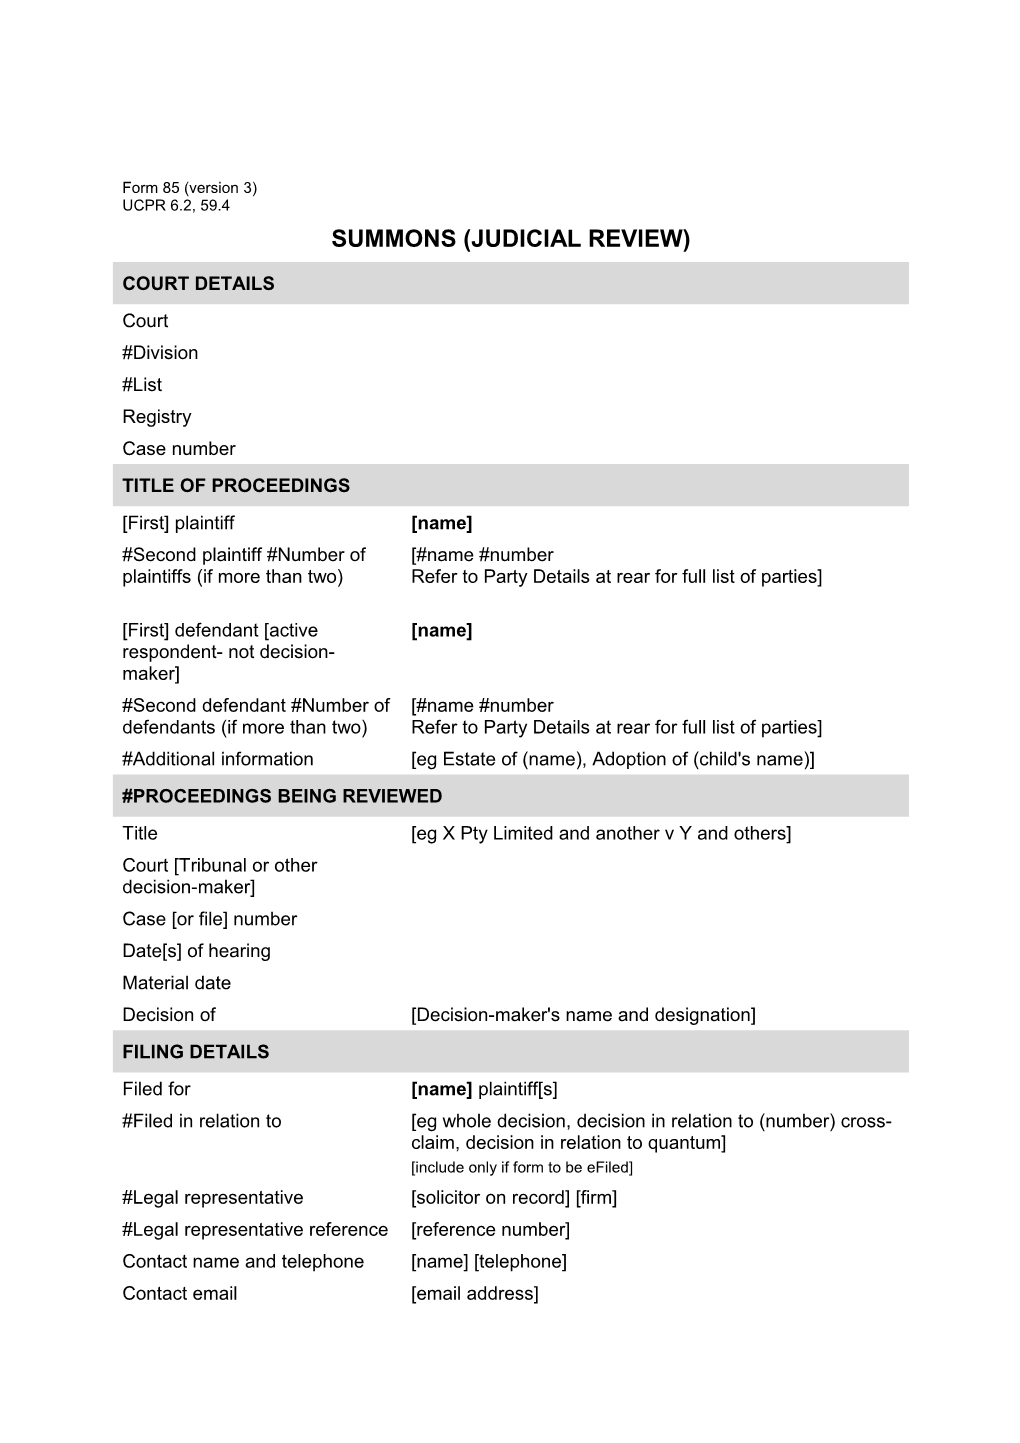 NSW UCPR Form 4A - Summons - Filing Party Legally Represented